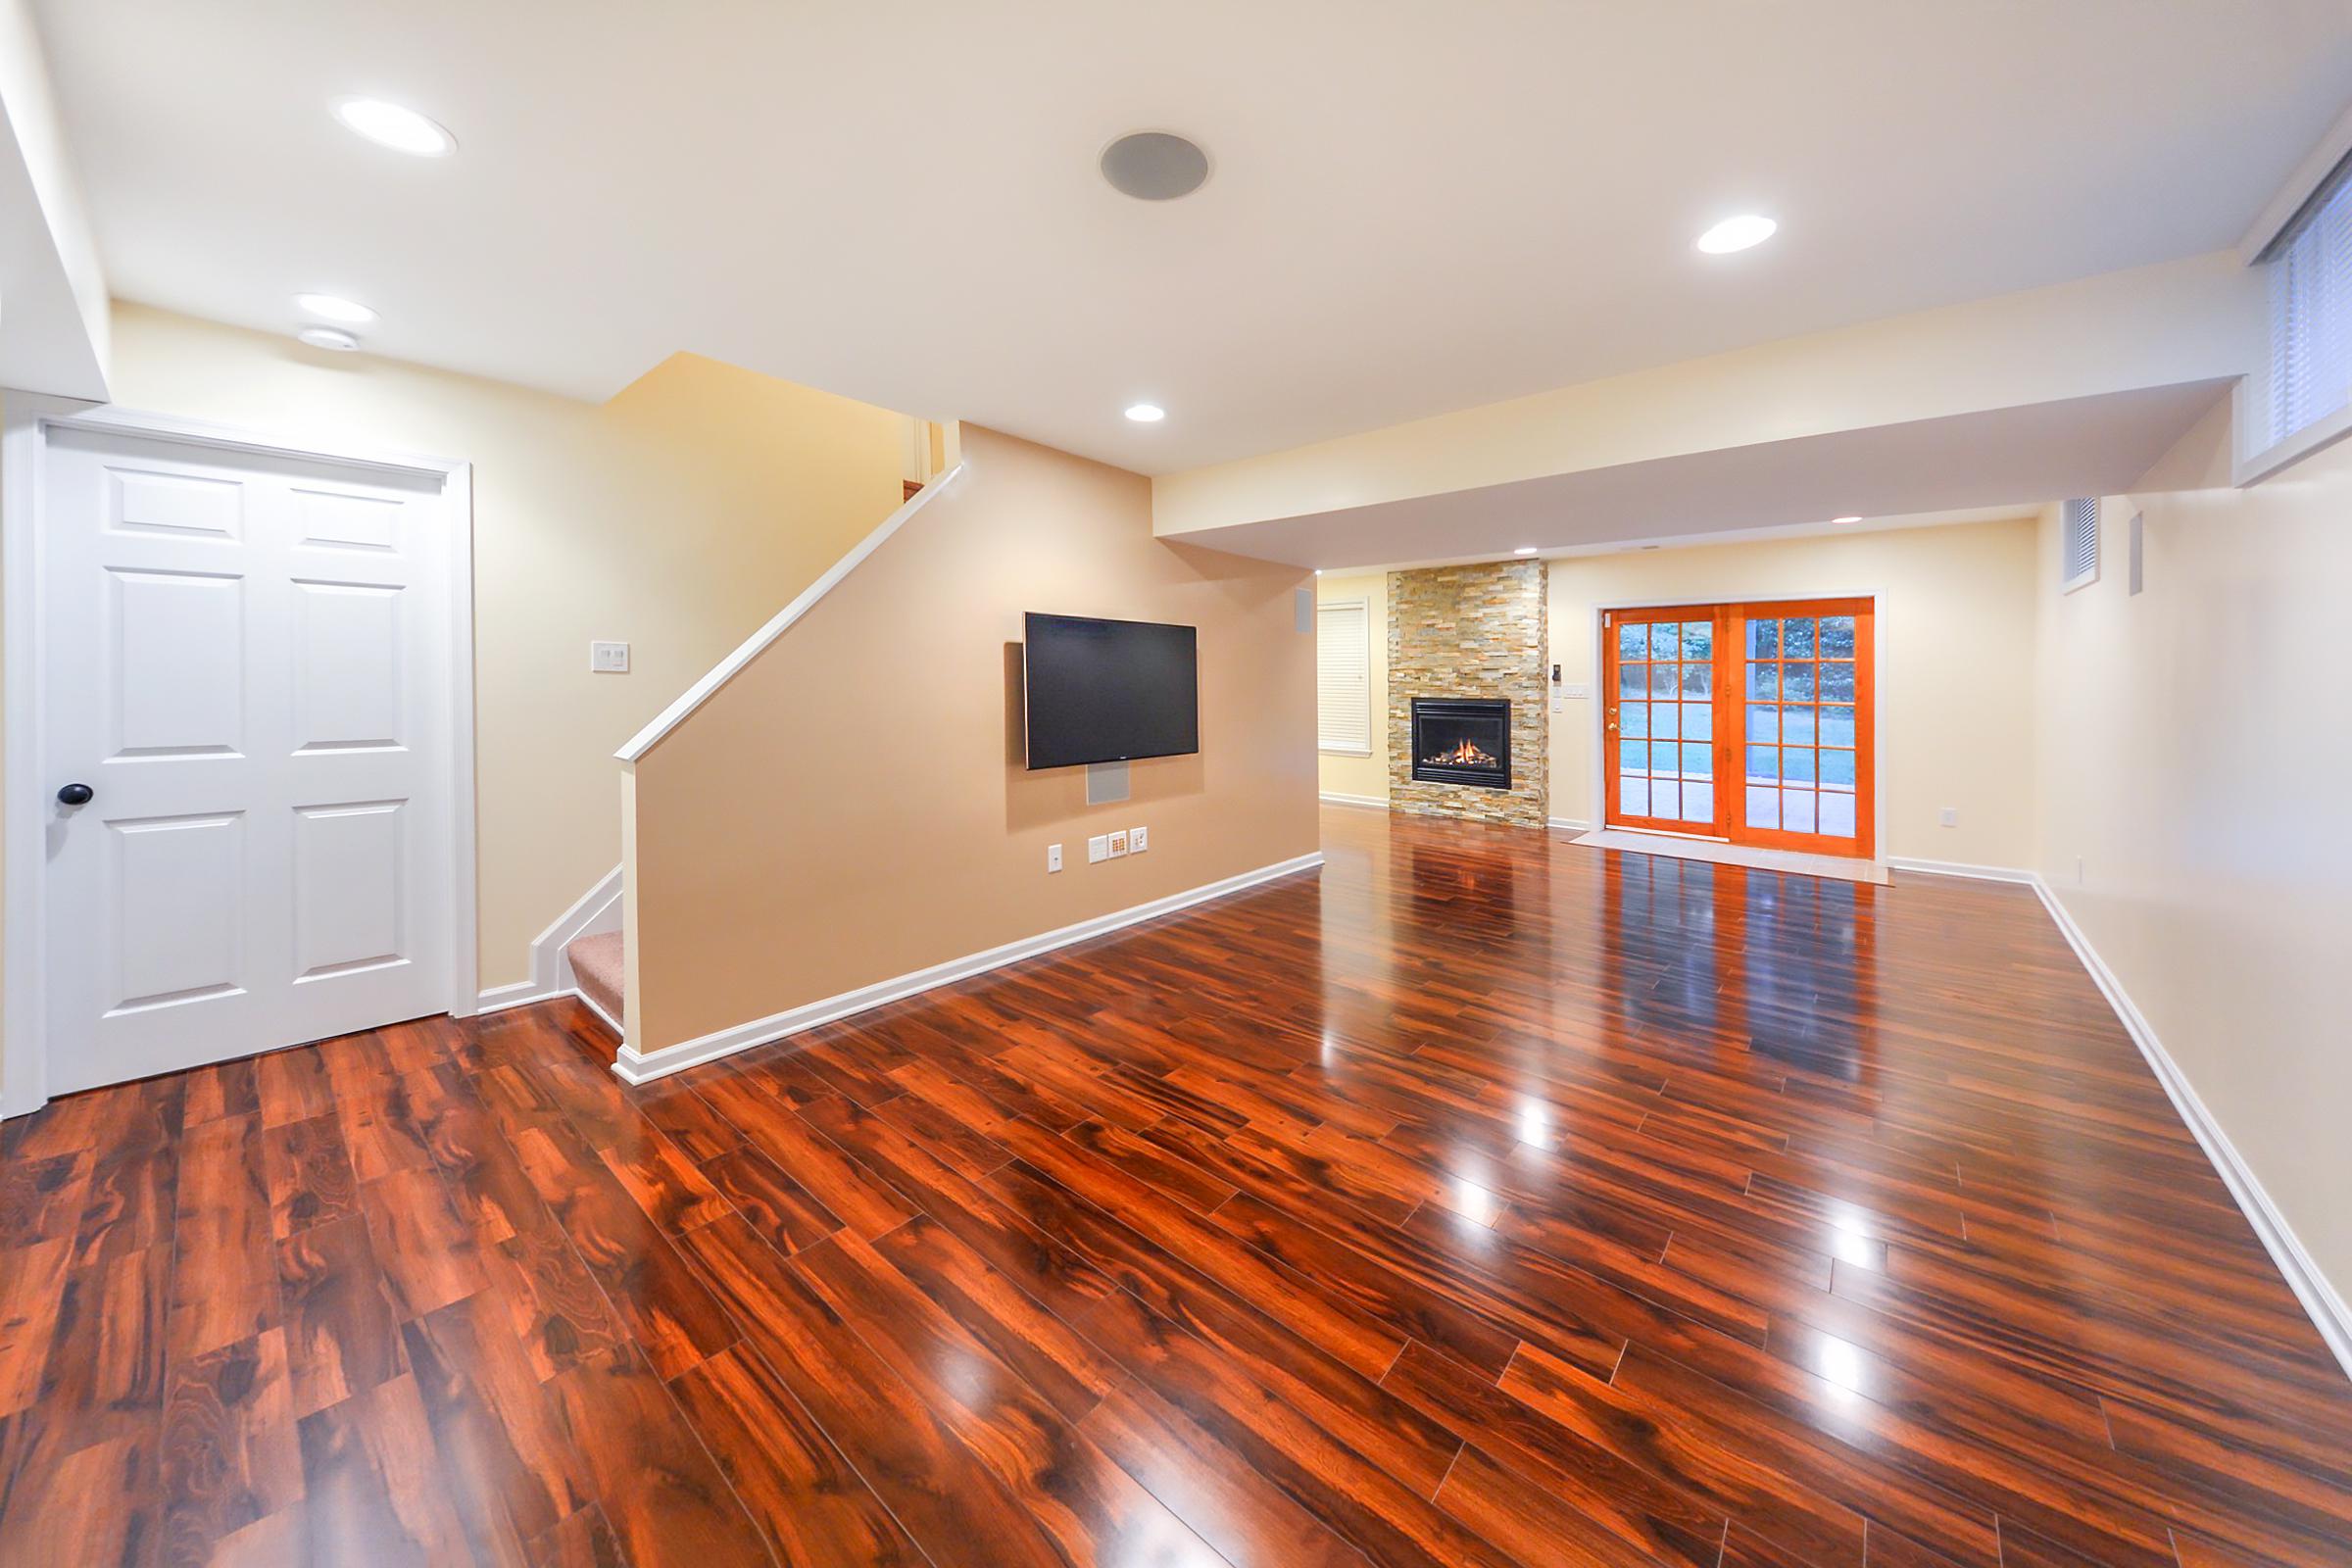  Basement Remodeling Costs